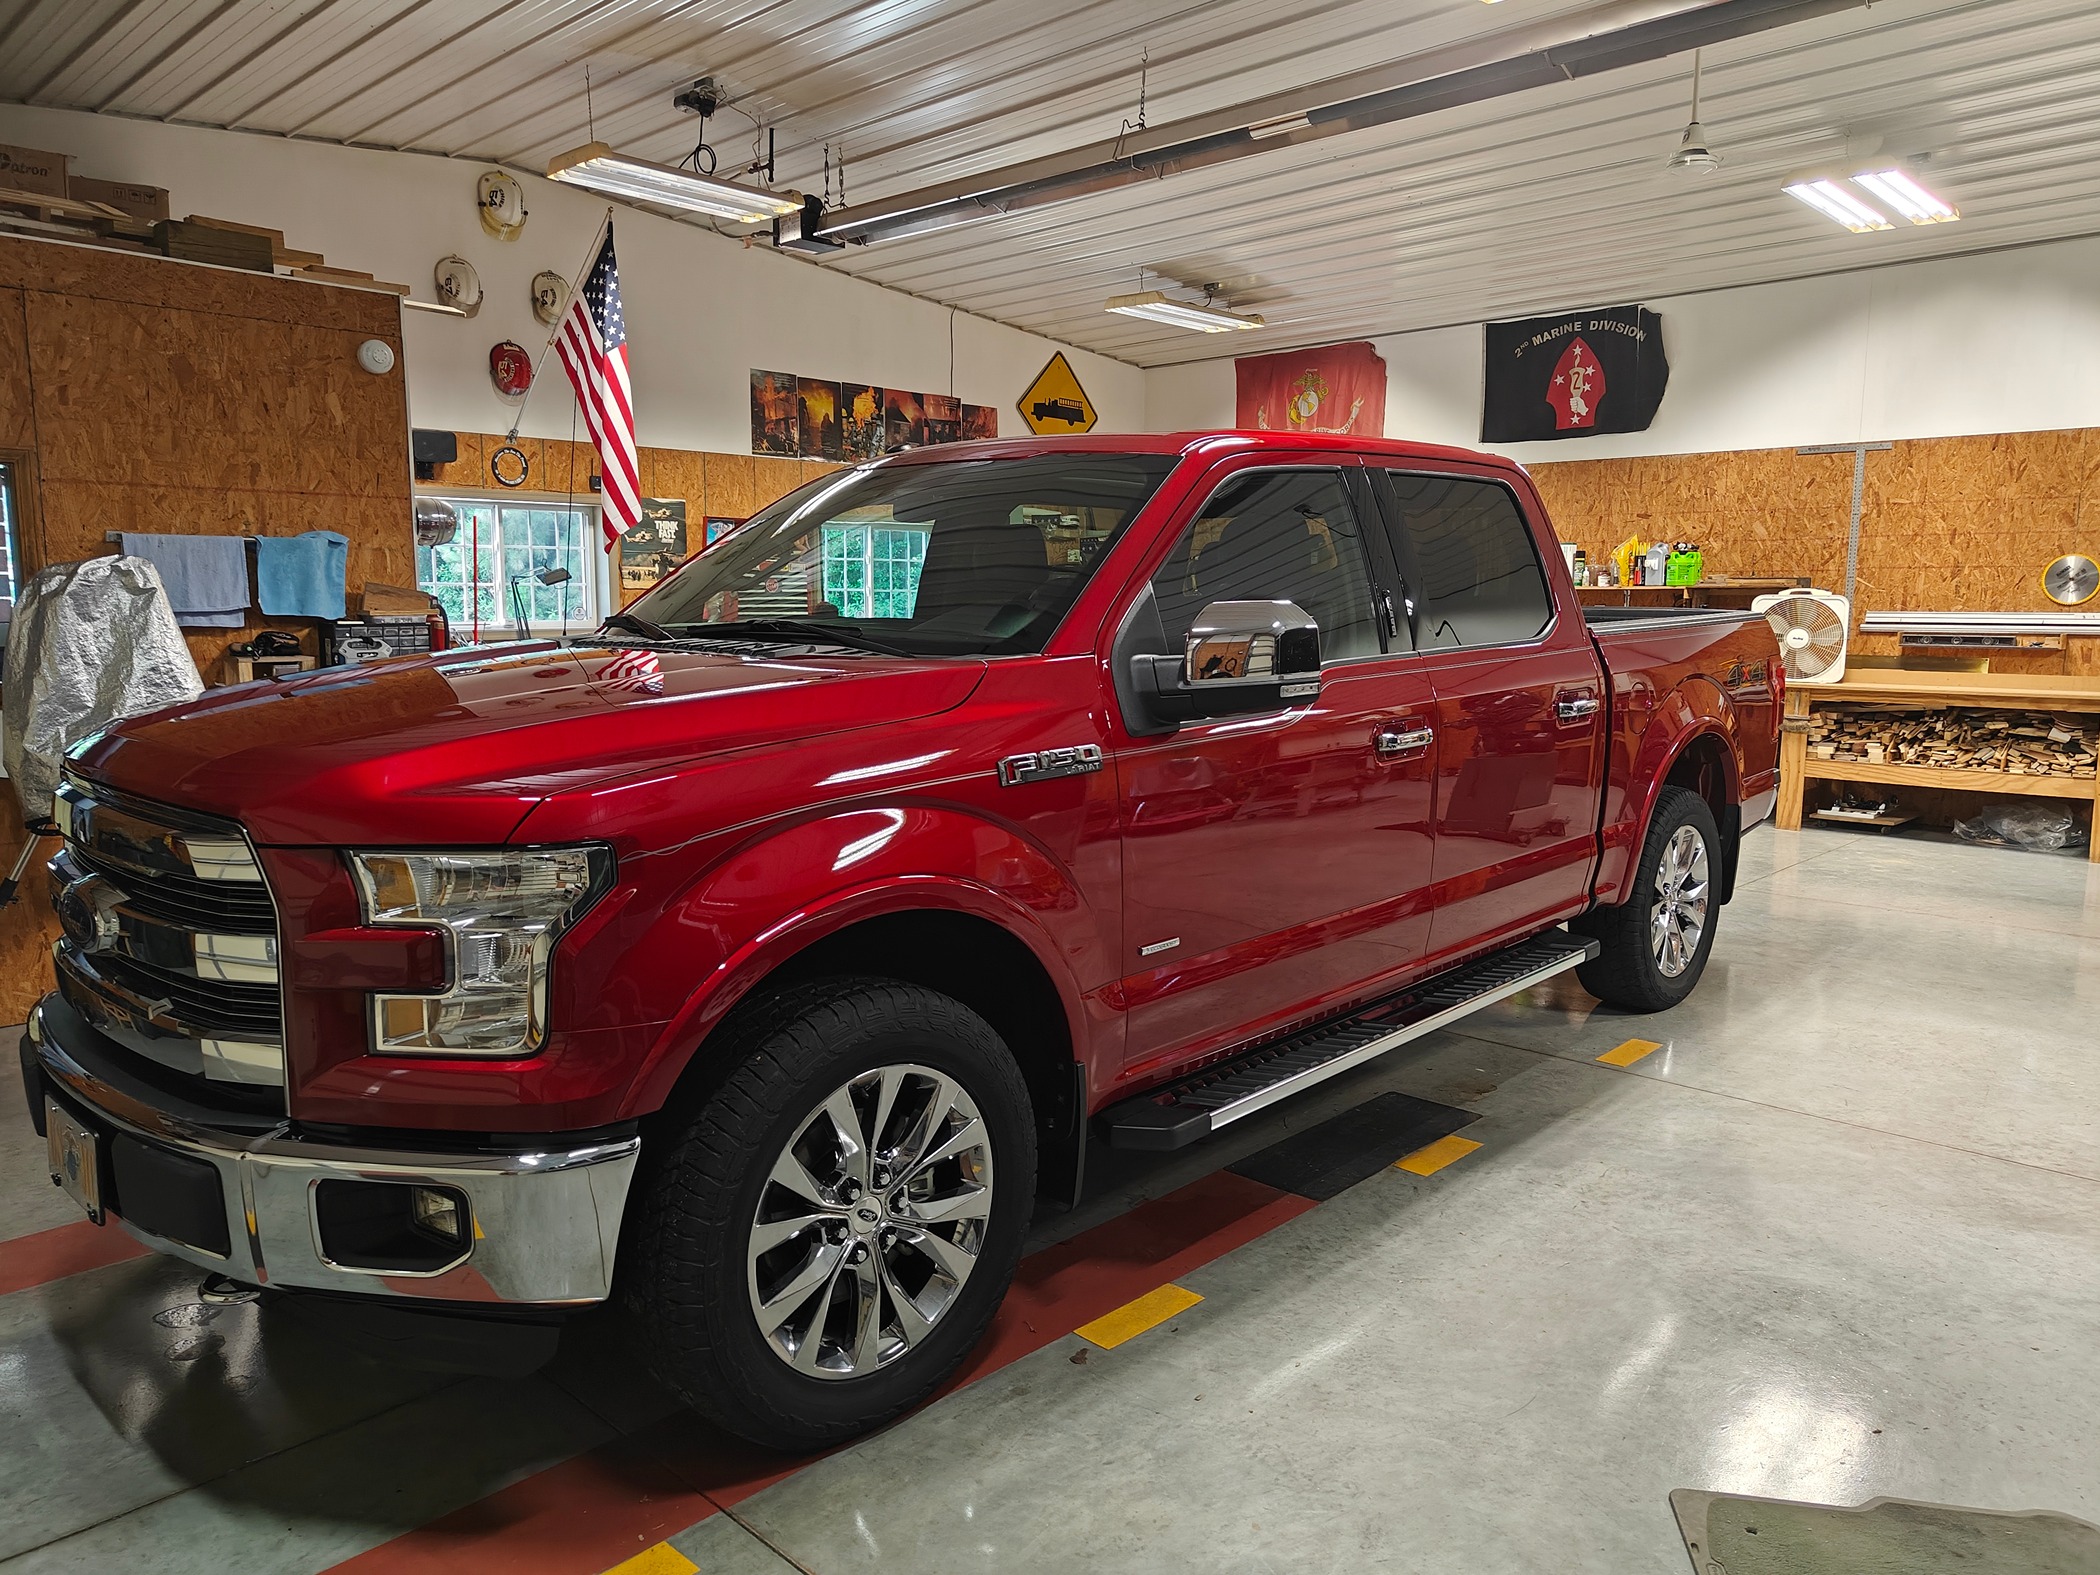 Ford F-150 Random F-150 Photos of the Day - Post Yours! 📸 🤳 2017 Lariat